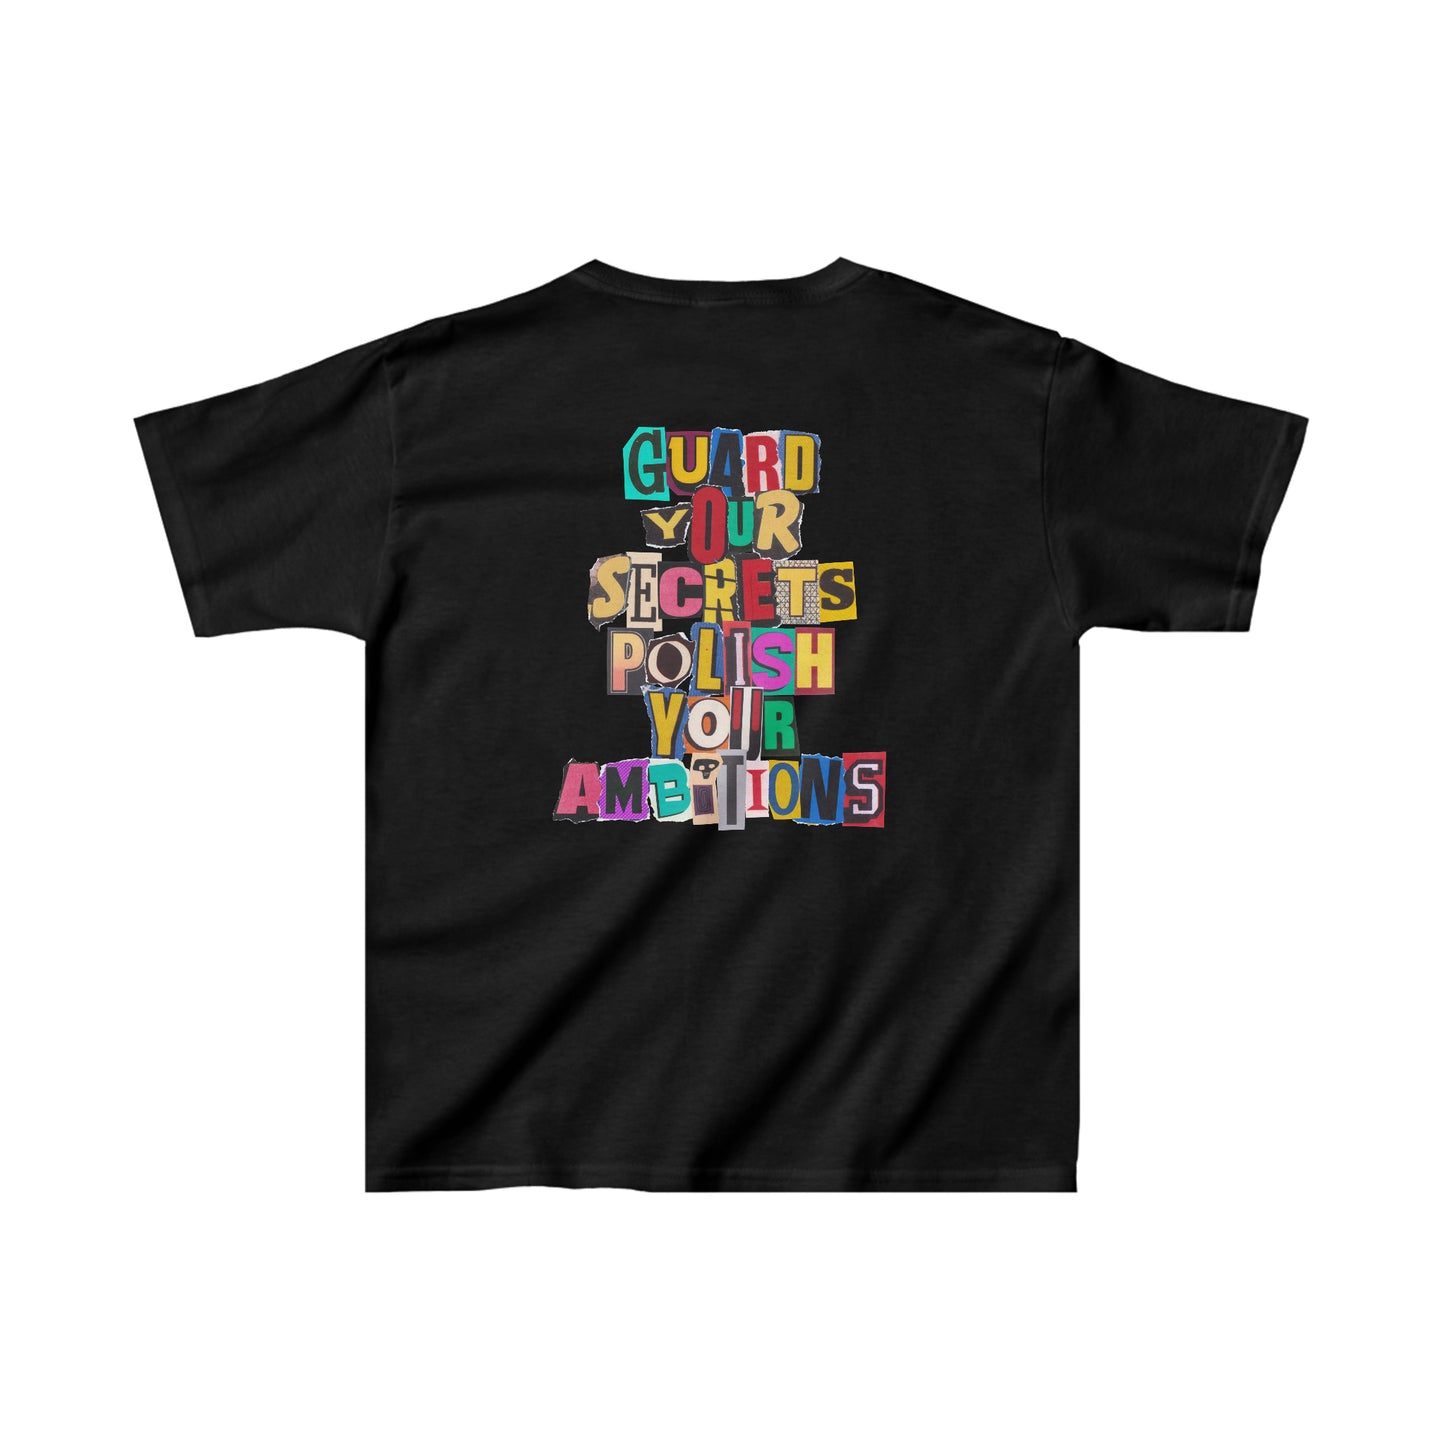 Youth WIY x Stroud Vintage T-Shirt